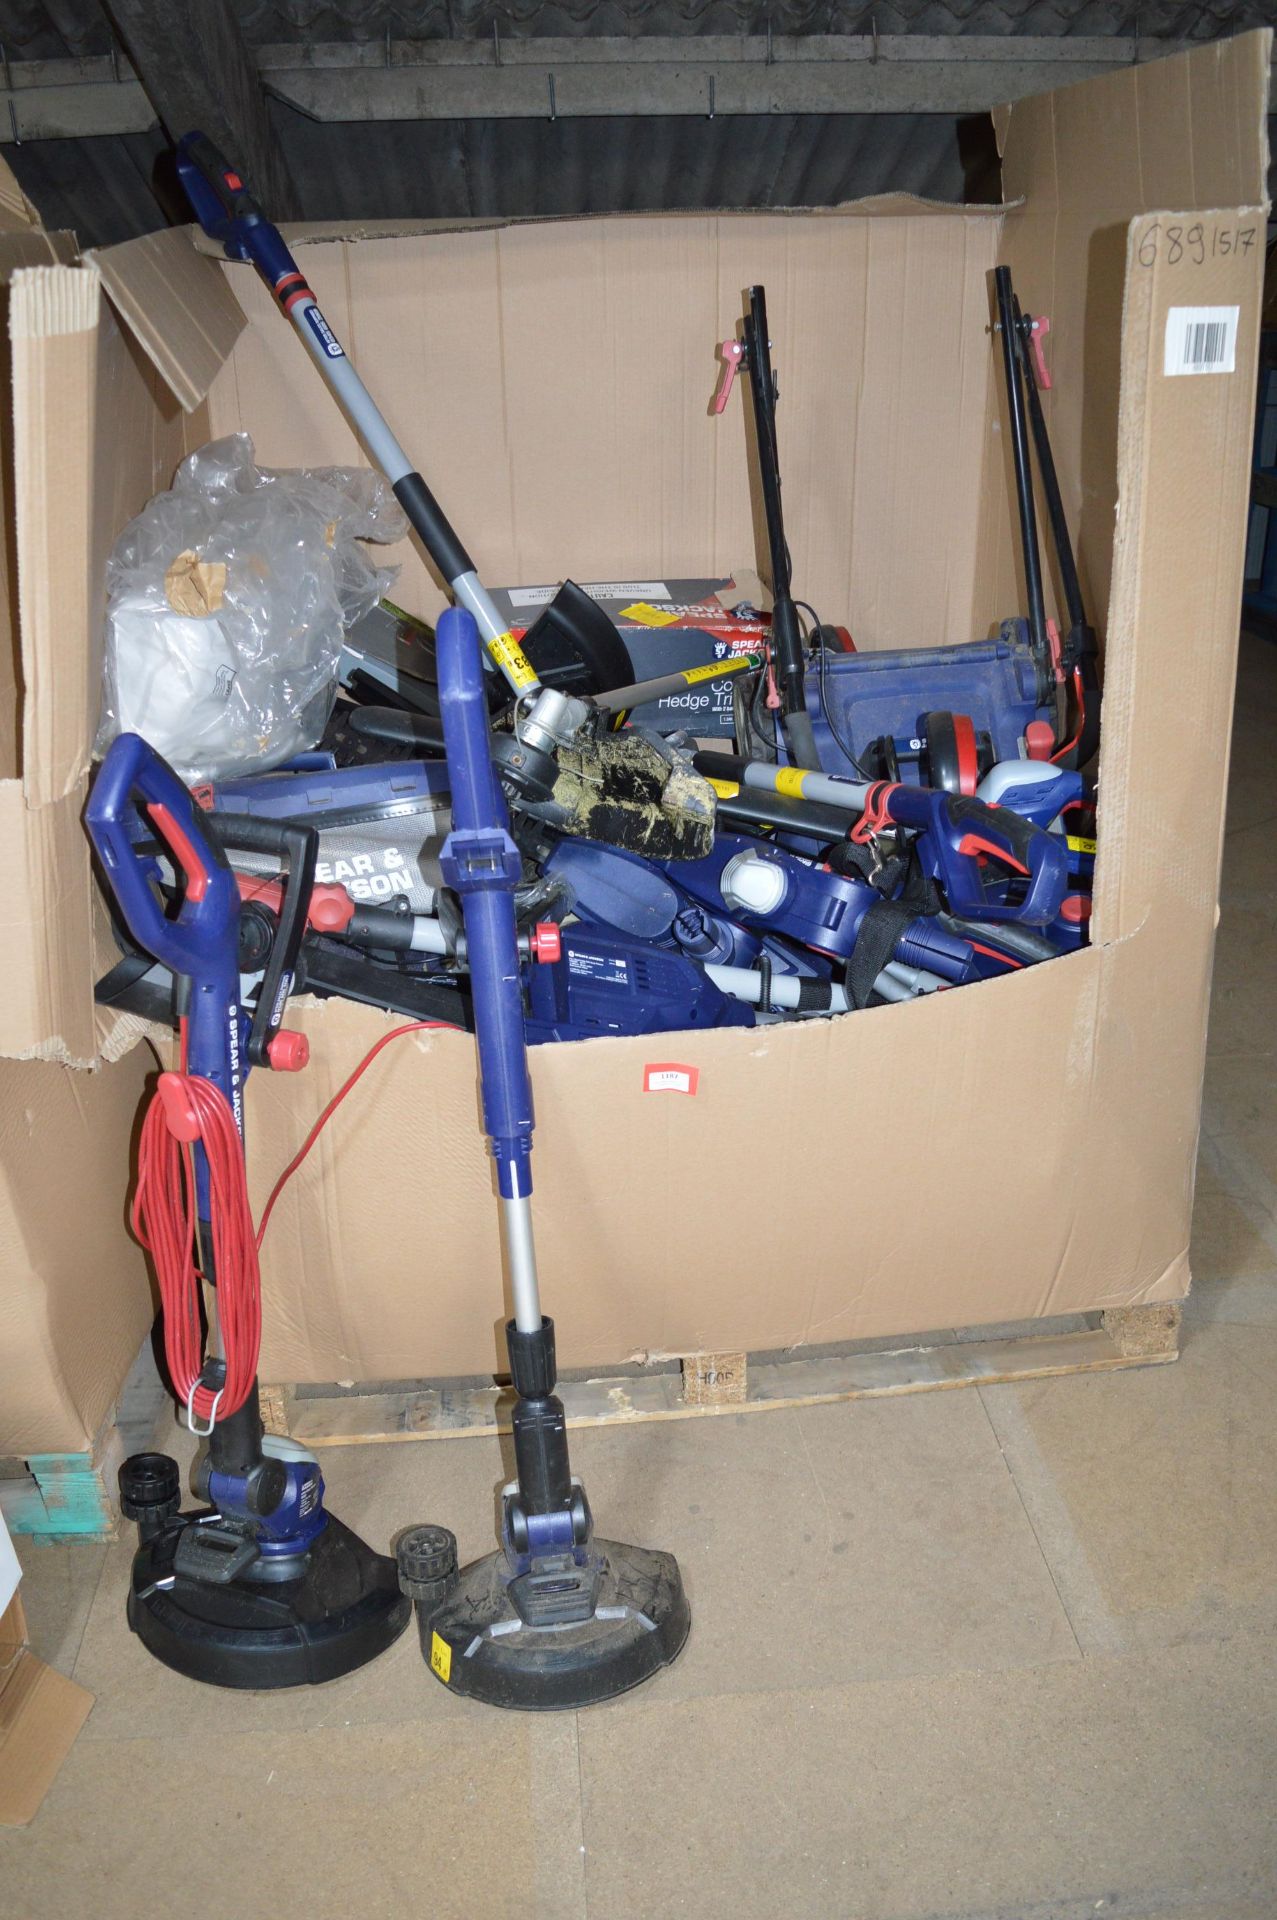 Pallet Containing a Quantity of Spear & Jackson Hedge Trimmers, Strimmer, and Lawnmowers (salvage)